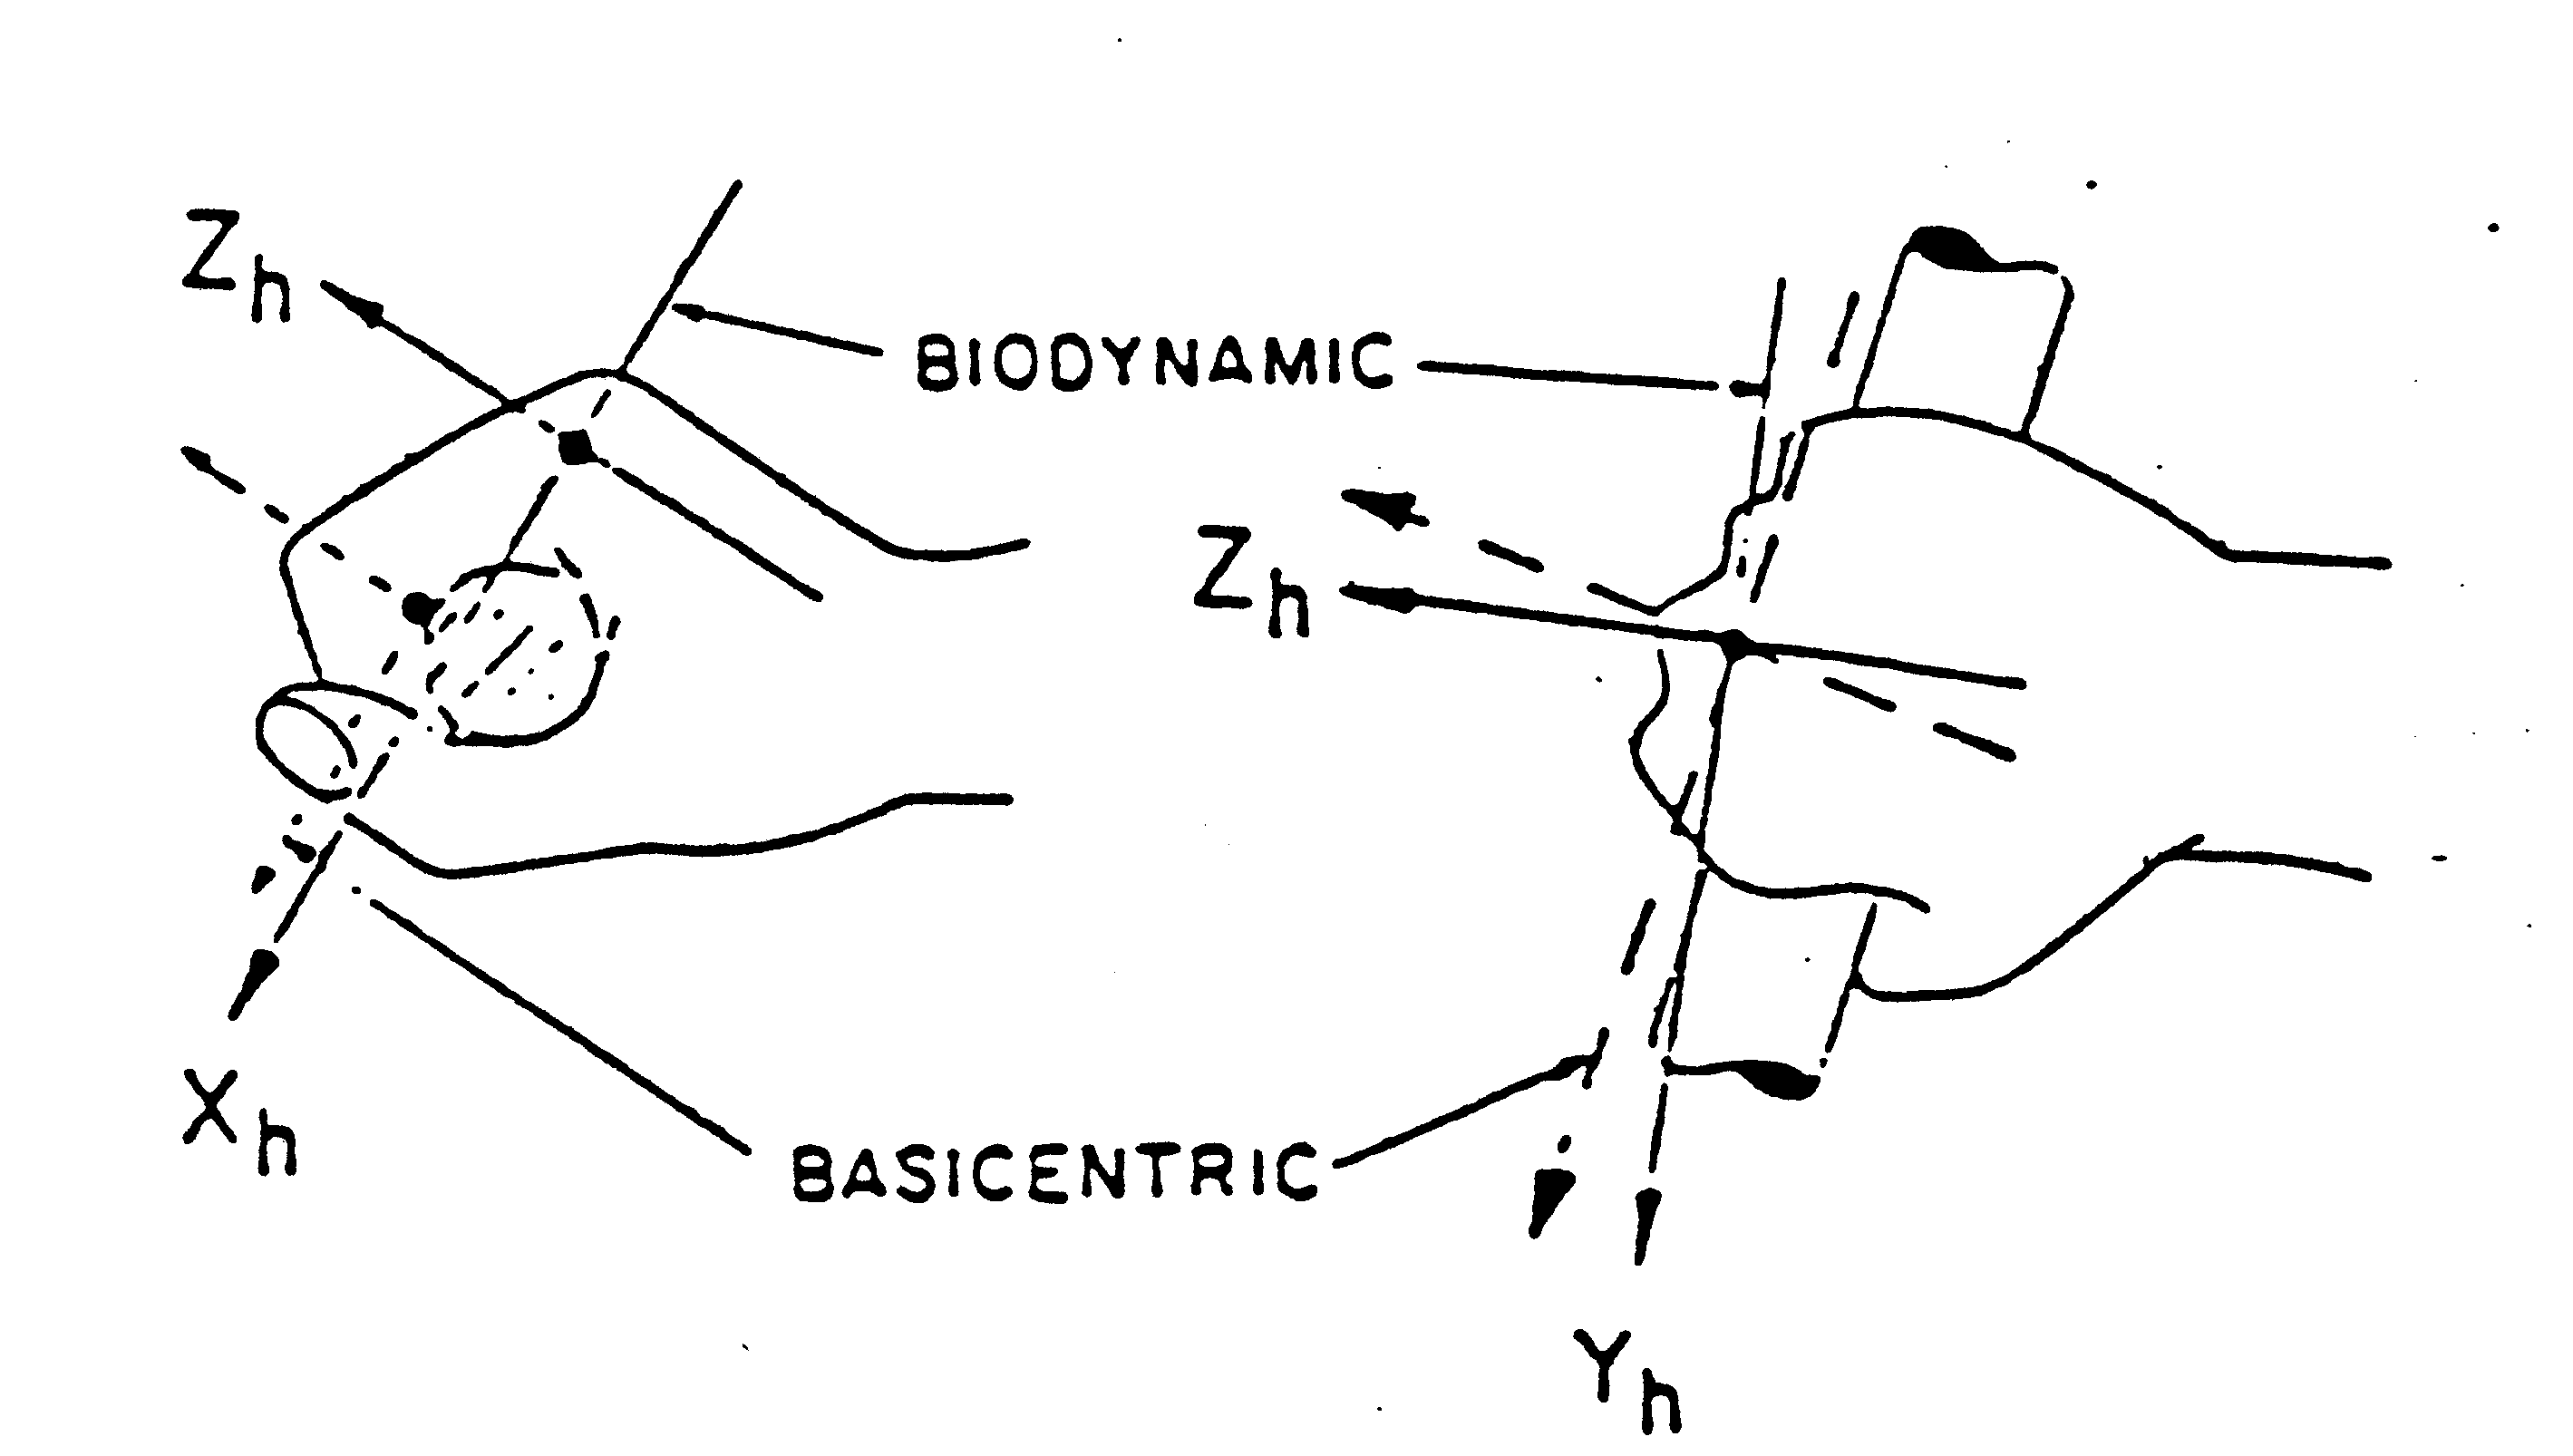 graphic showing Biodynamic and basicentric coordinate
systems for the hand